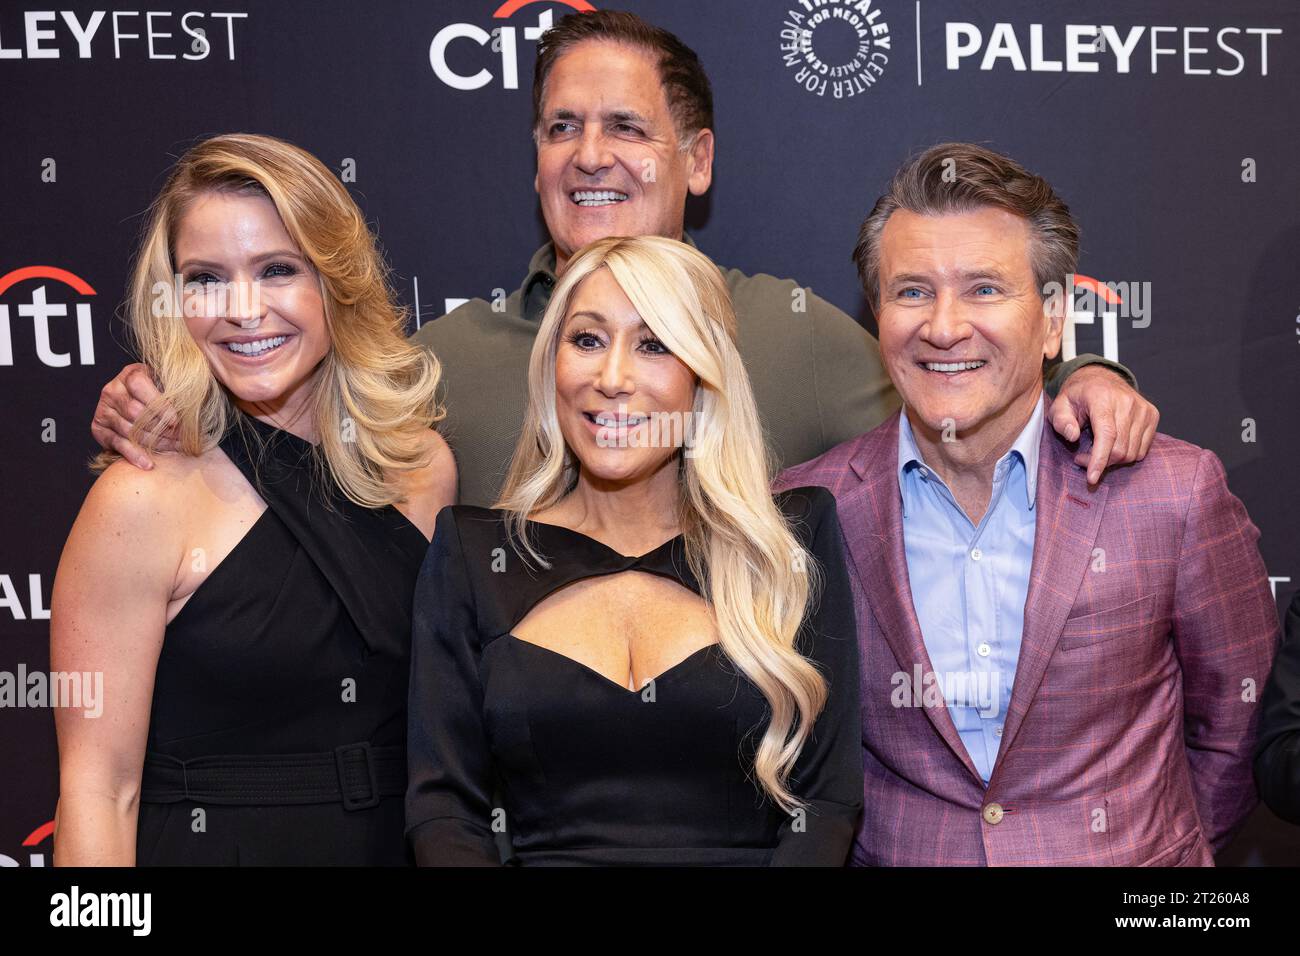 https://c8.alamy.com/comp/2T260A8/new-york-united-states-16th-oct-2023-sara-haines-lori-greiner-mark-cuban-and-robert-herjavec-attend-paleyfest-new-york-shark-tank-at-the-paley-center-for-media-in-new-york-ny-october-16-2023-photo-by-hailstorm-visualssipa-usa-credit-sipa-usaalamy-live-news-2T260A8.jpg